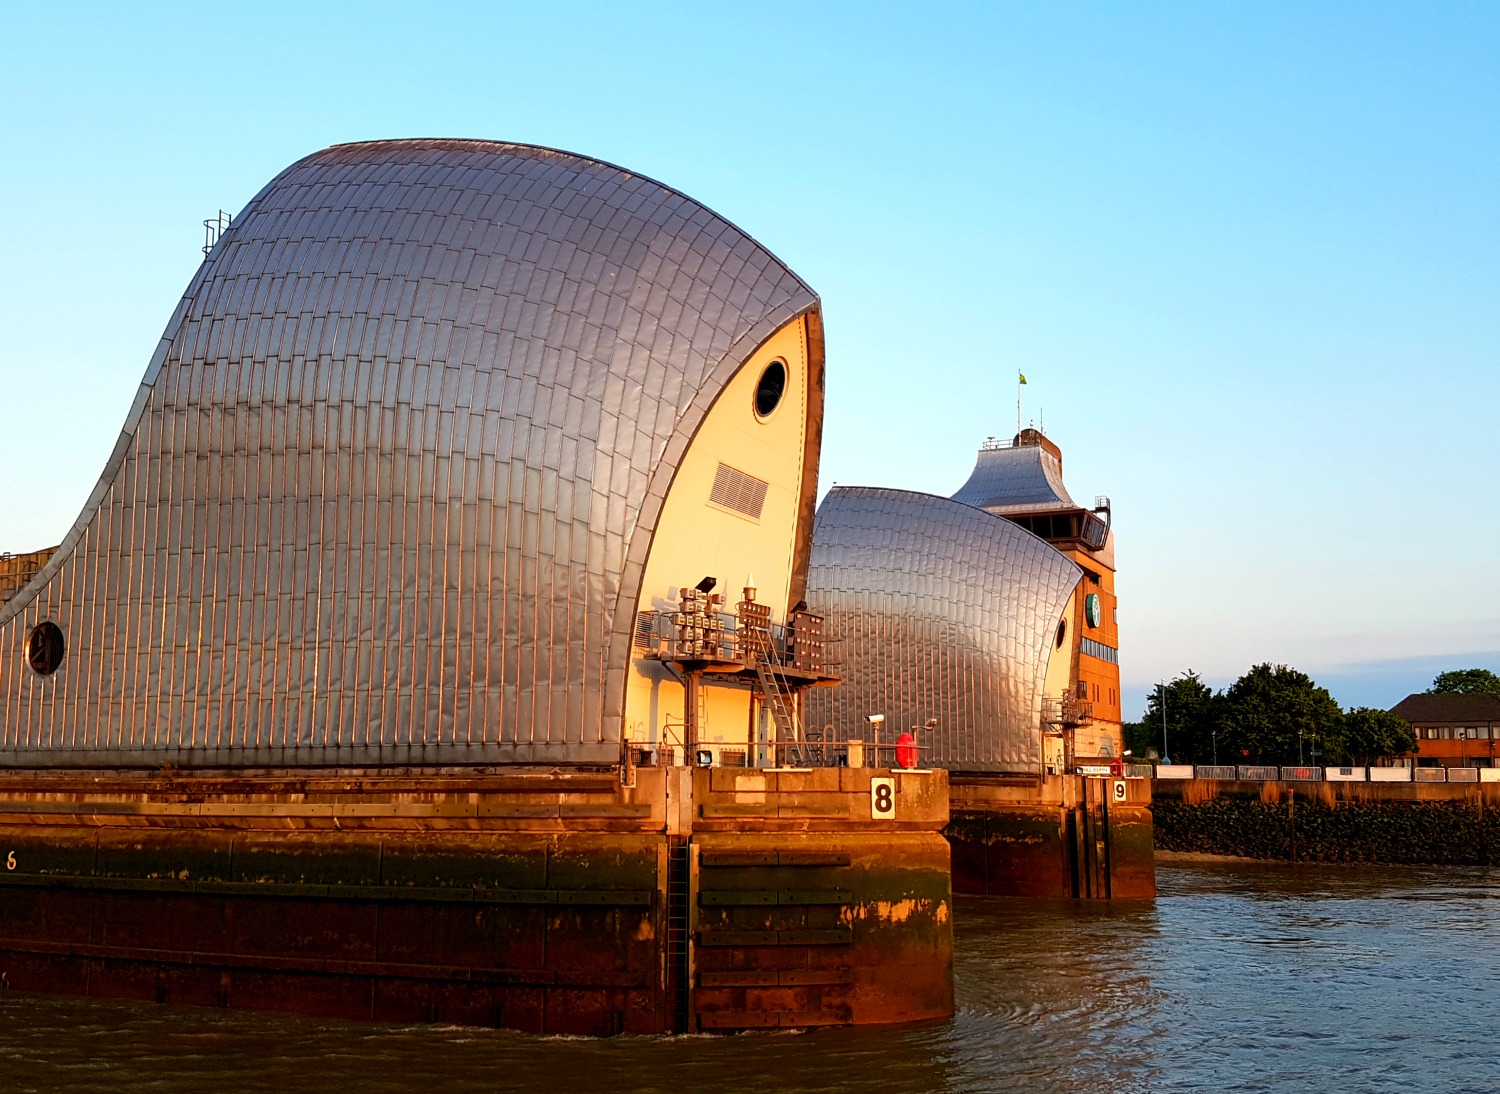 The Thames Barrier and the end of the Thames Path - some boat tours of London with kids travel to this point